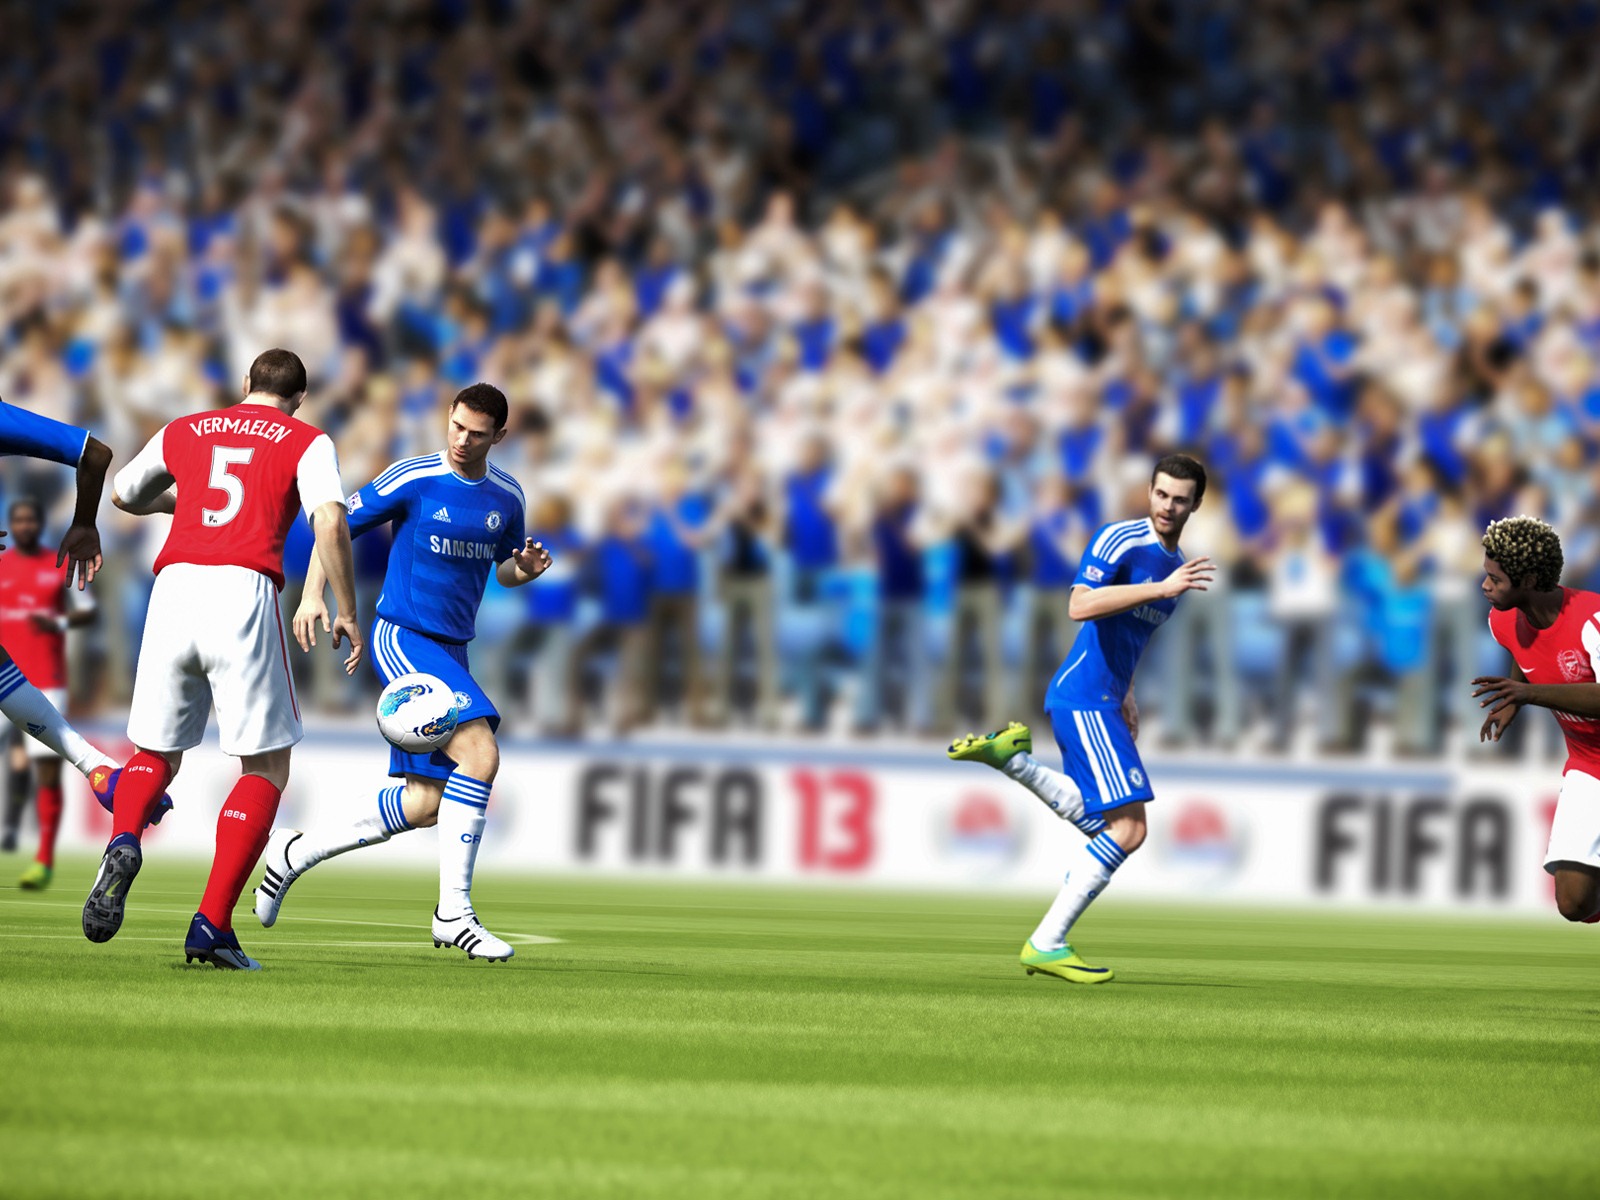 FIFA 13 game HD wallpapers #13 - 1600x1200